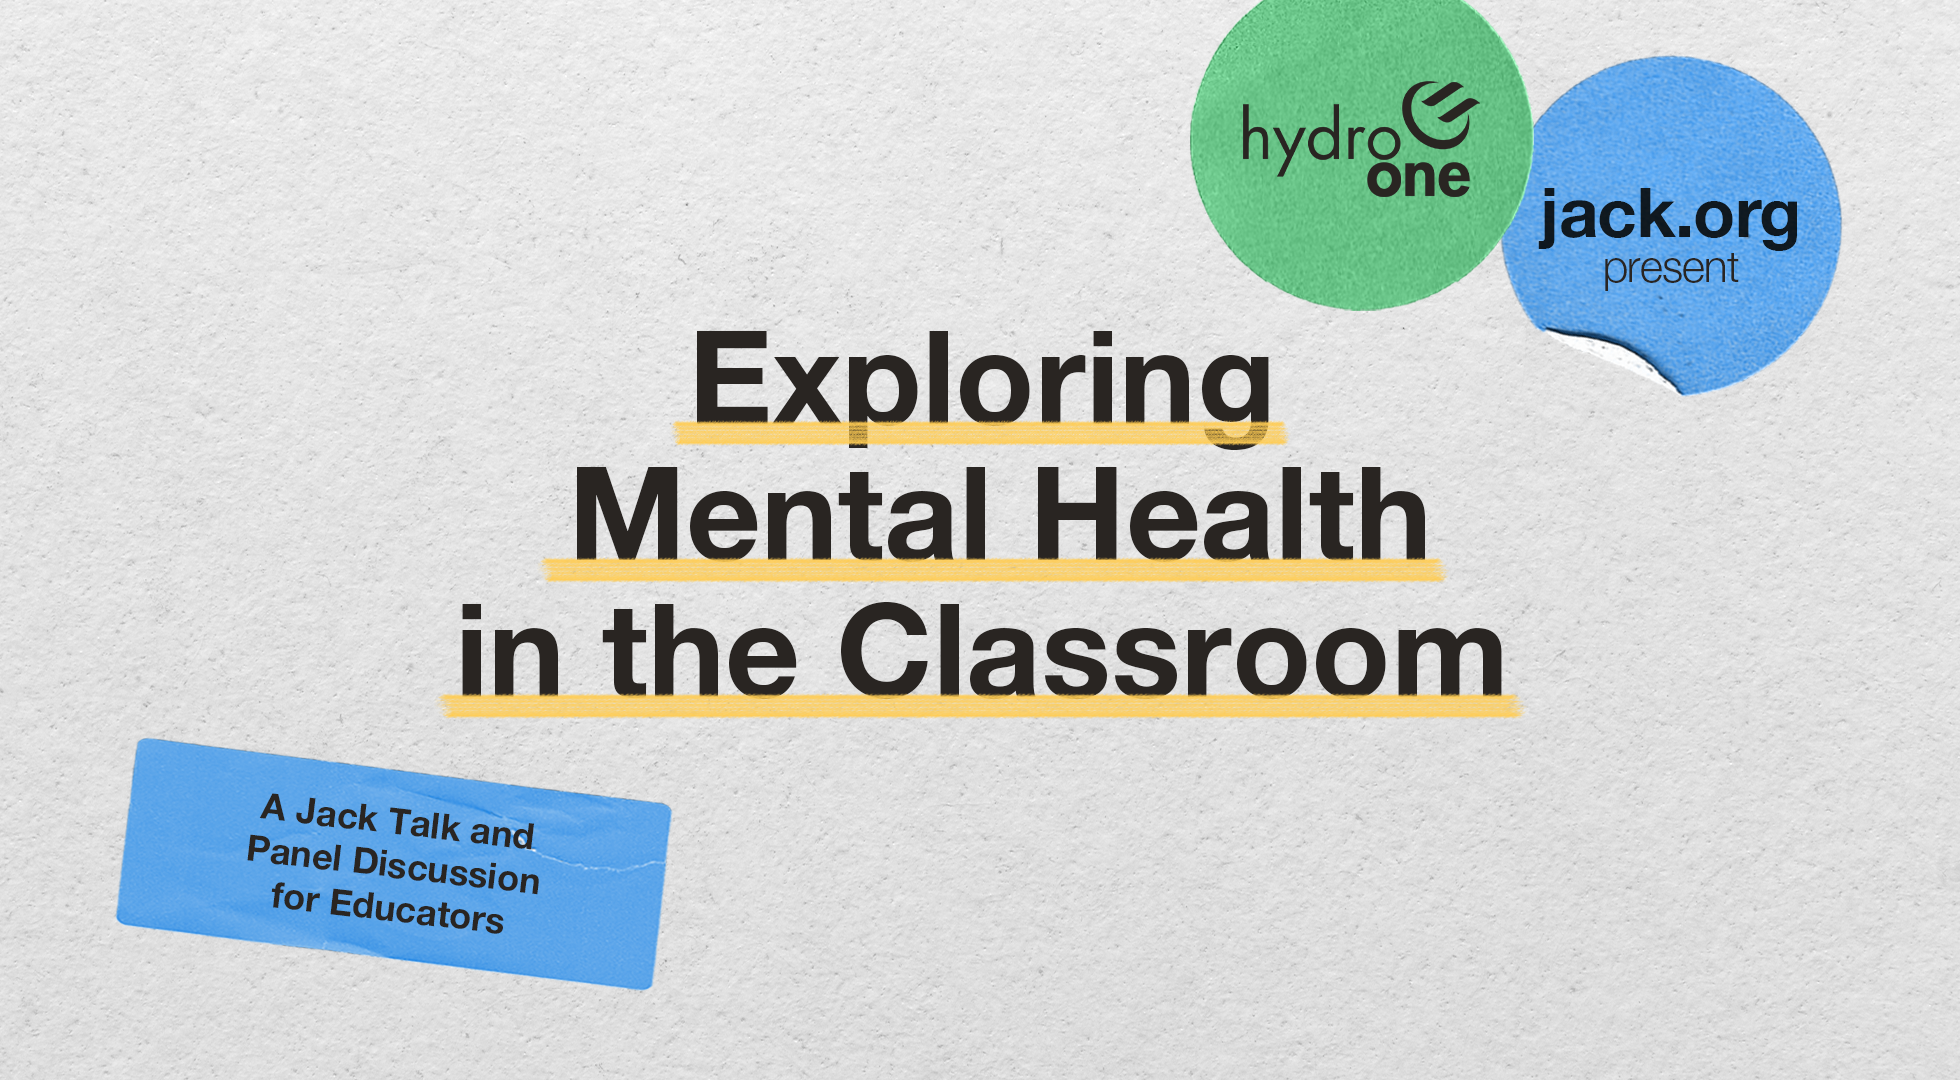 Jack.org and Hydro One Present: Exploring Mental Health in the Classroom